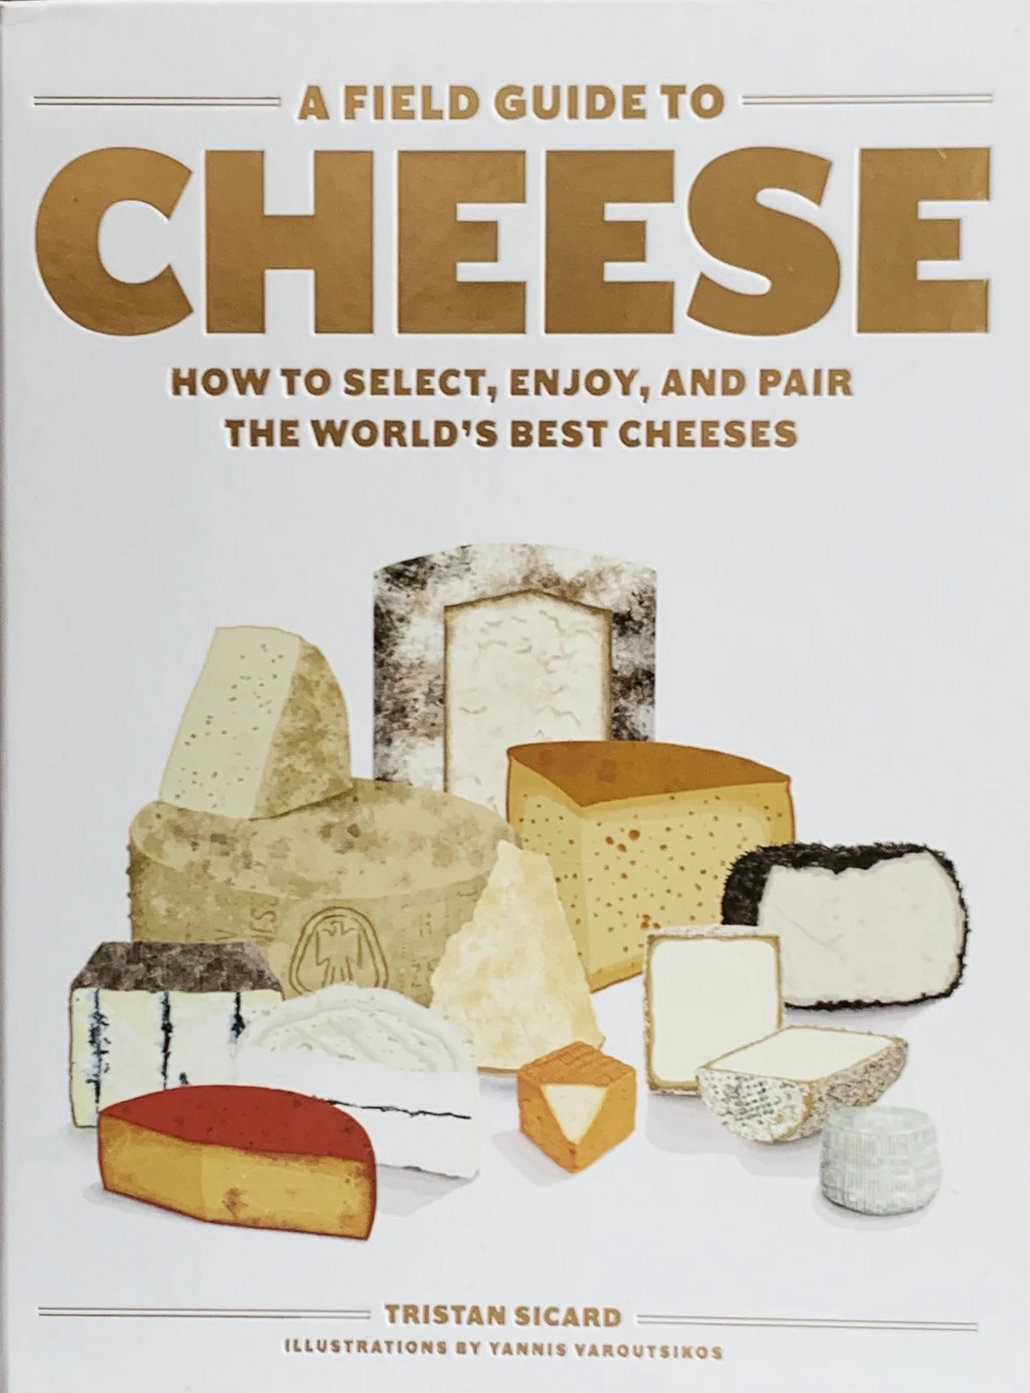 Field Guide to cheese